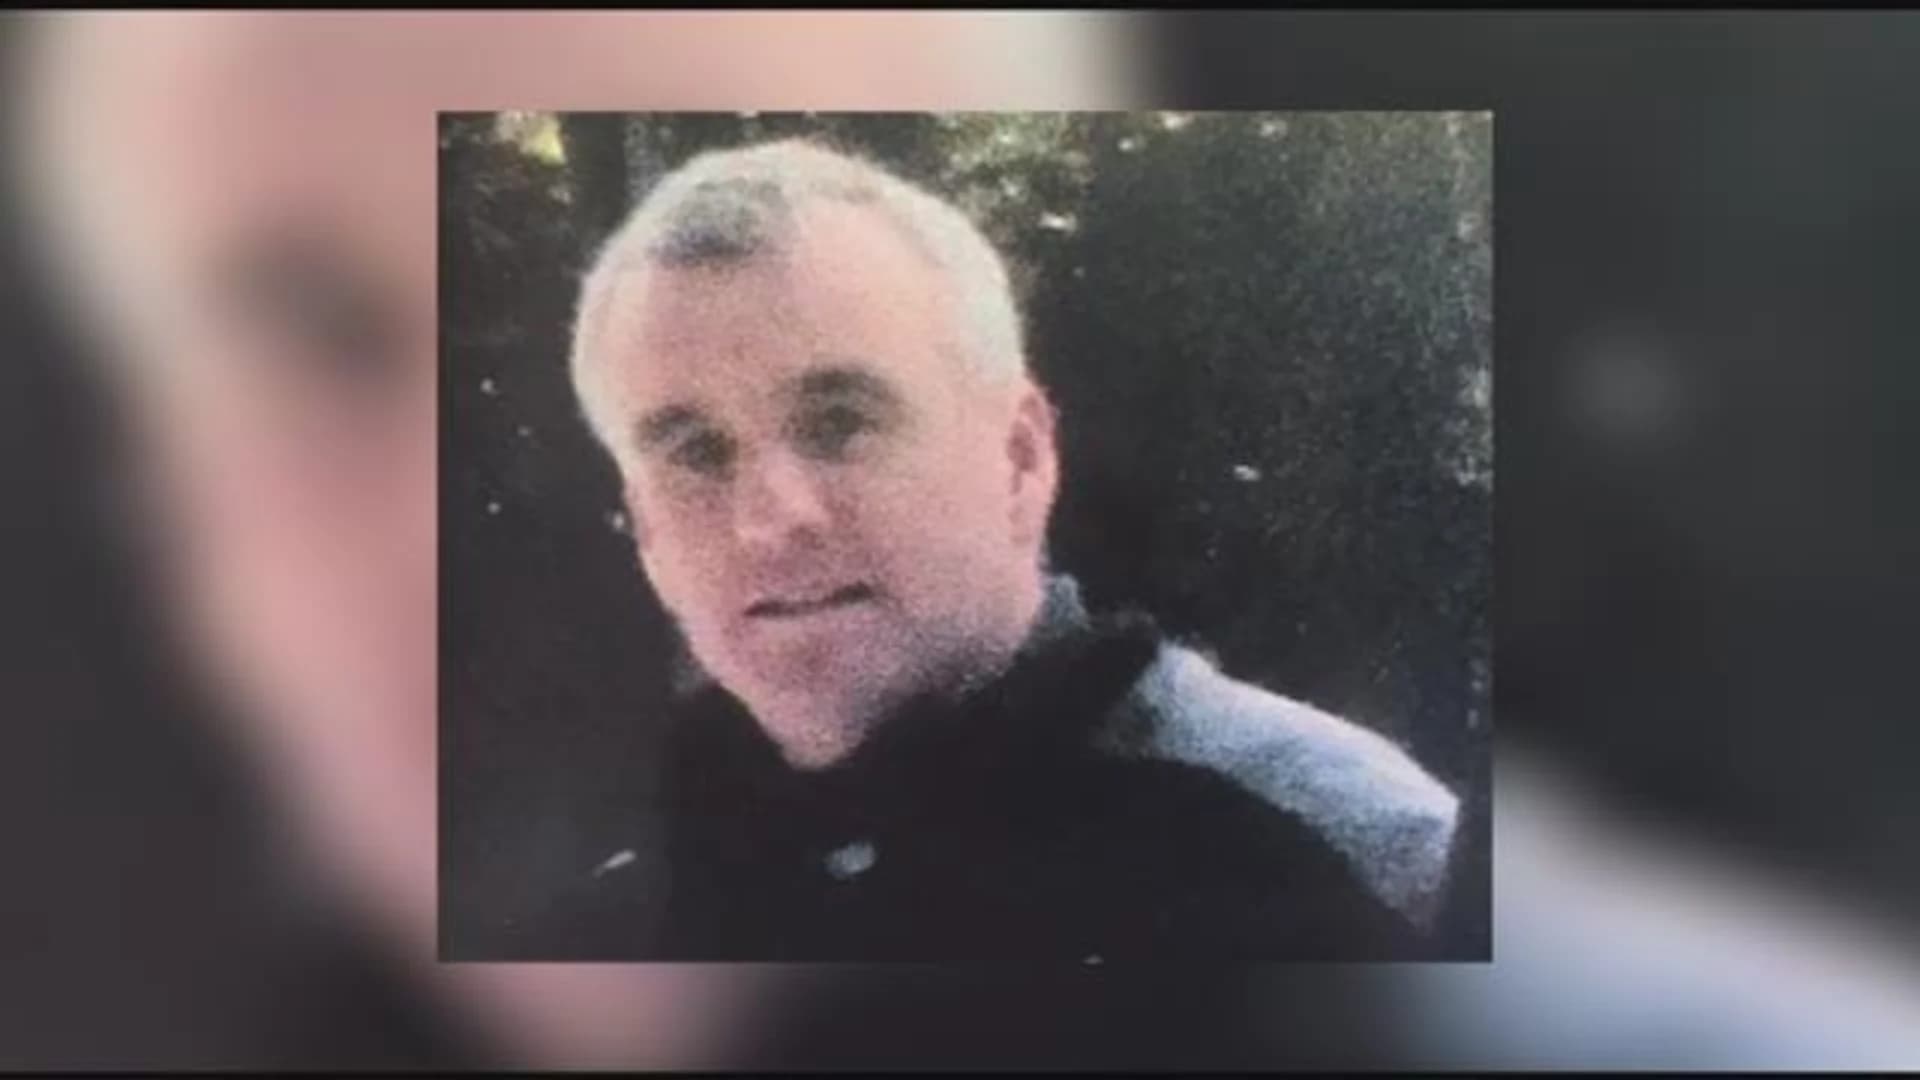 Police search for Pelham Bay man missing for more than 30 days